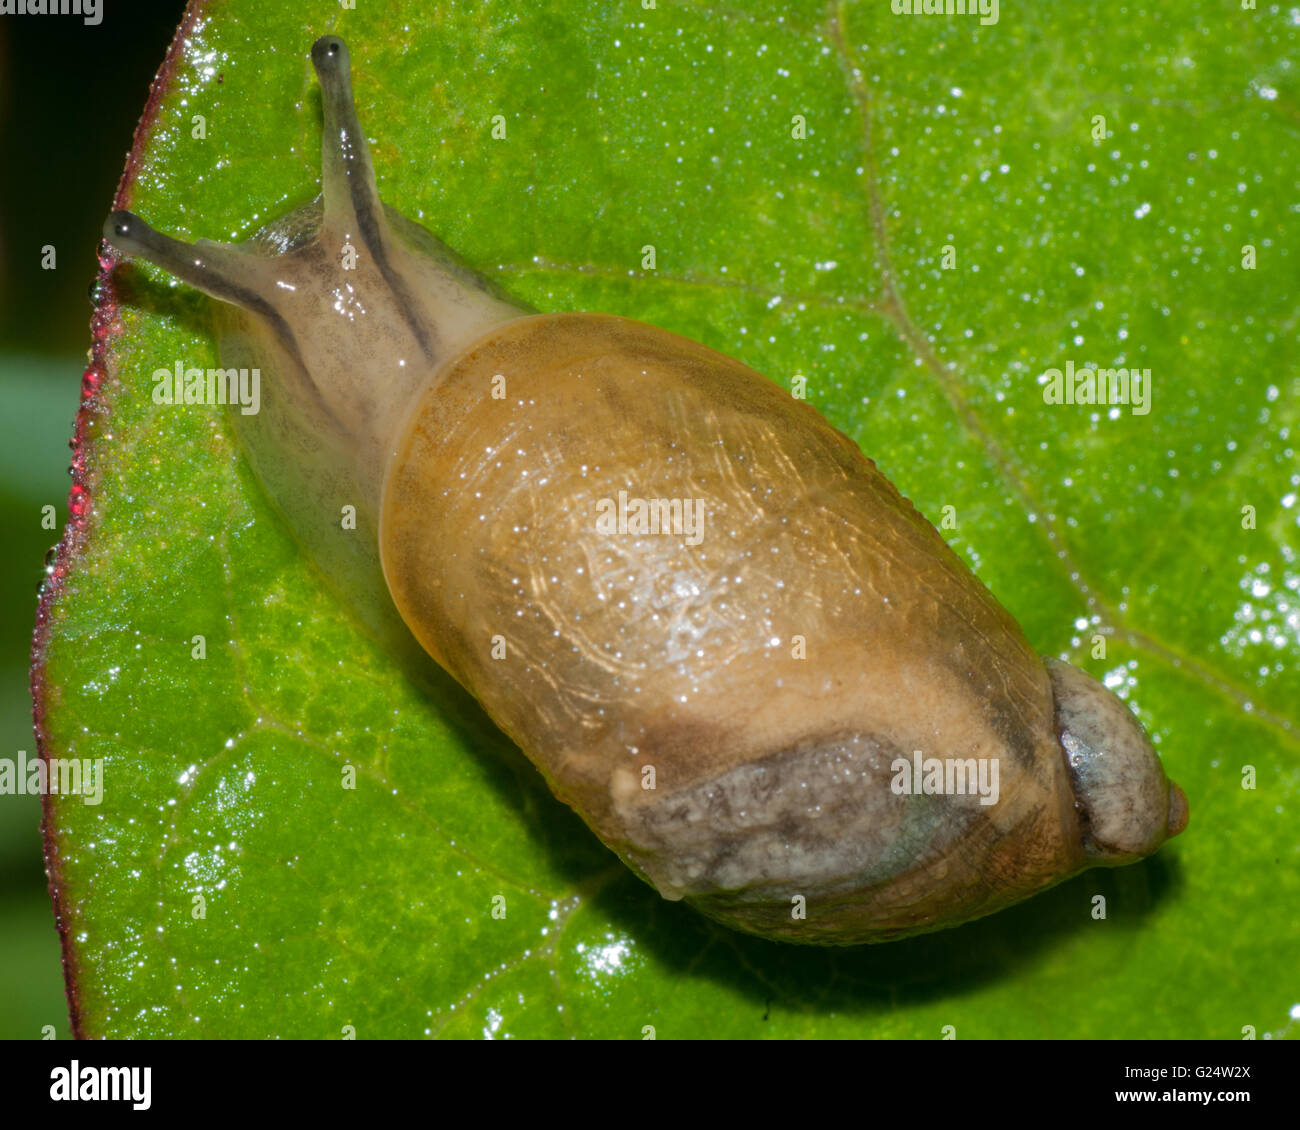 Garden Snail perched on a green plant leaf. Stock Photo